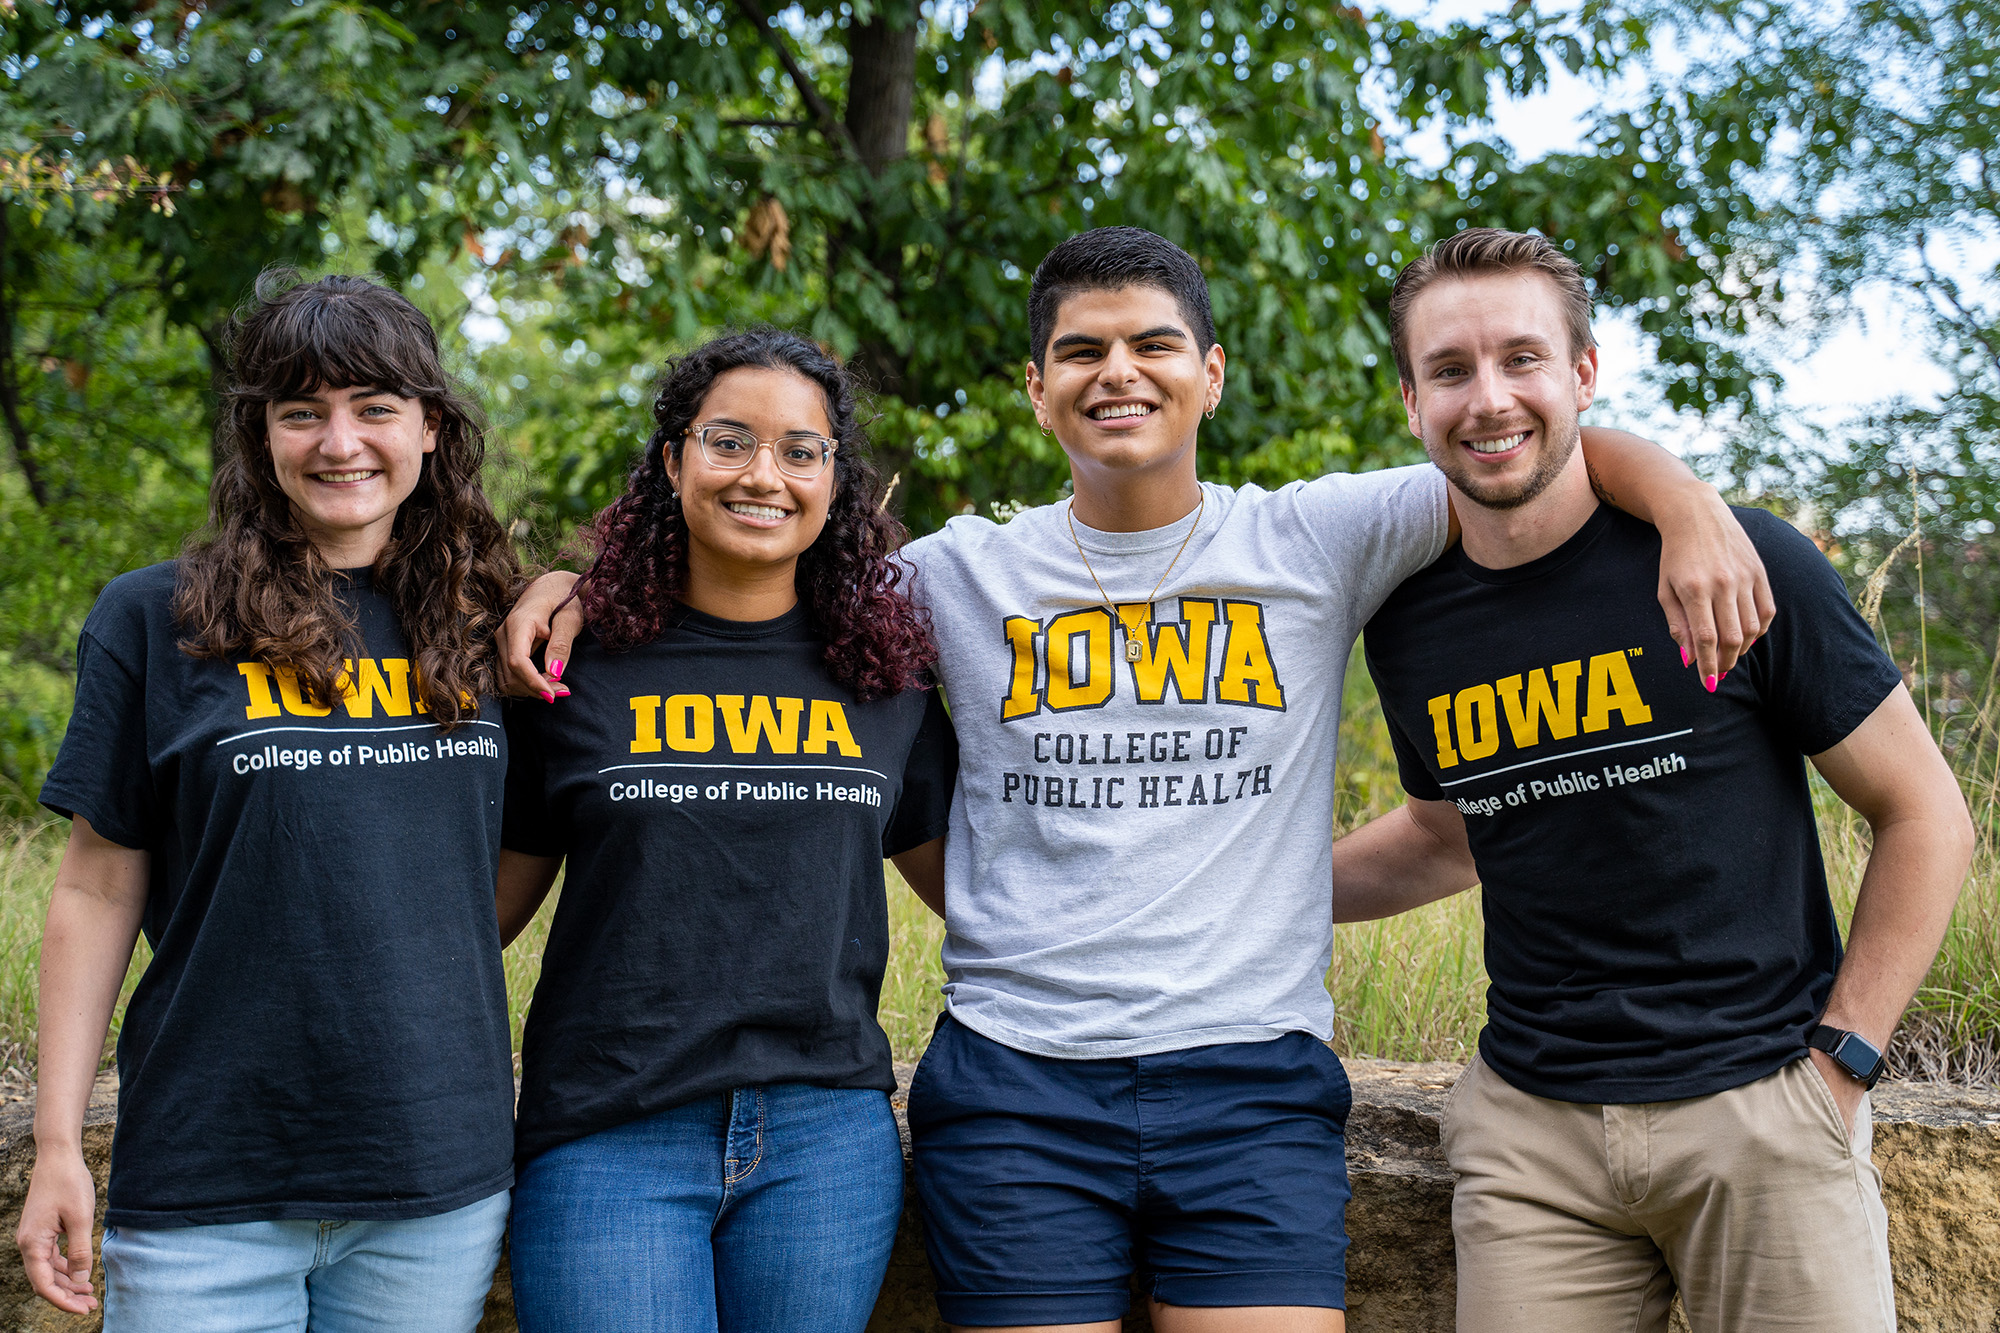 four University of Iowa student podcasters pose for a group photo in an outdoor setting